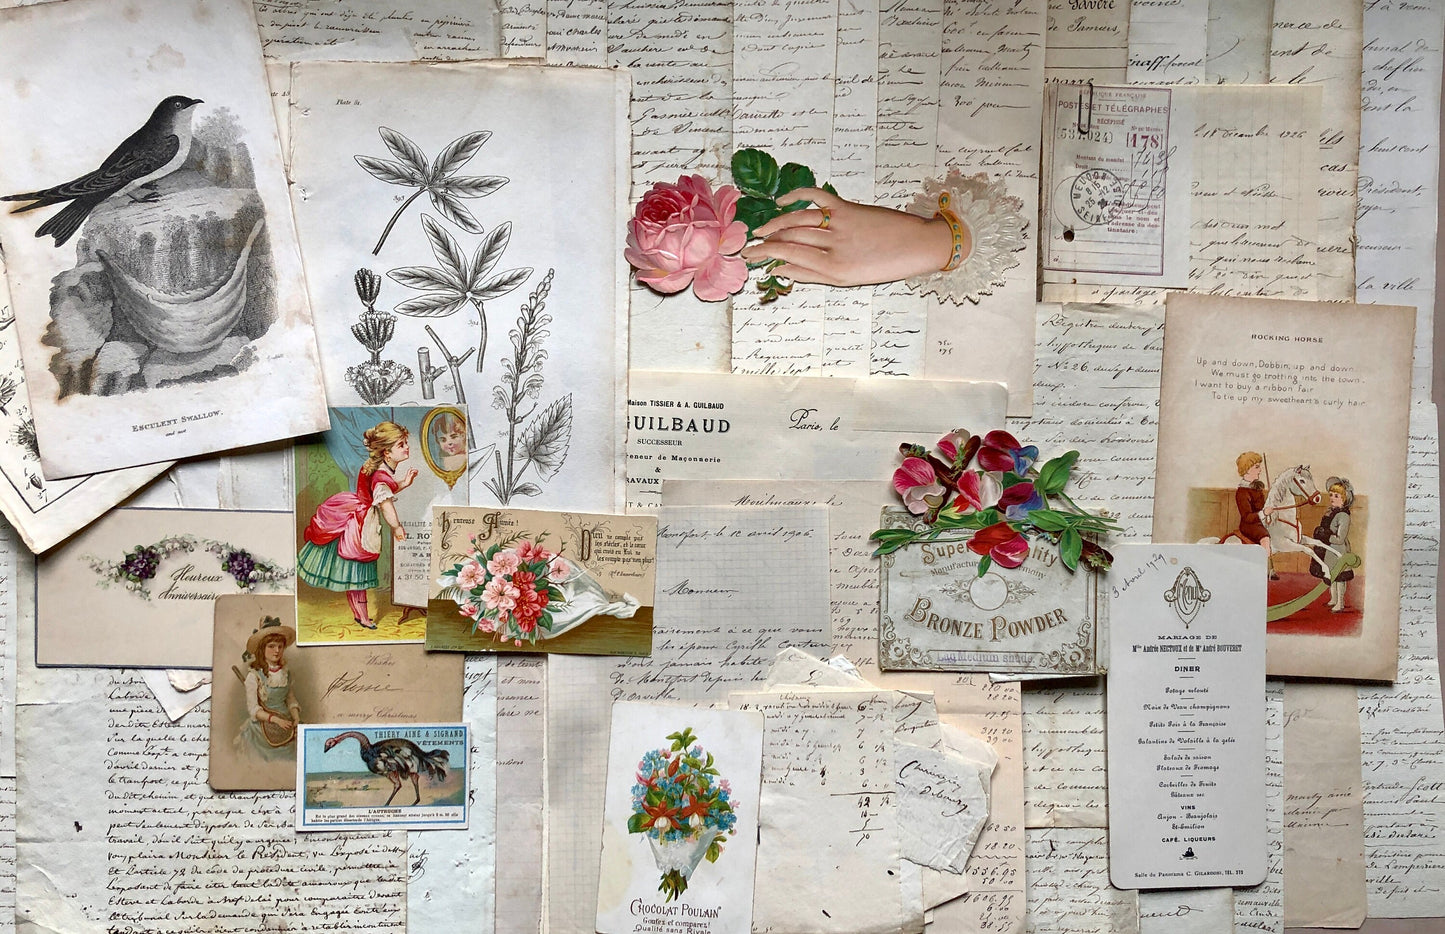 A Generous Quantity of Antique French Papers, Cards and Engravings. 1800’s and 1900’s. For collage and decorative purposes.